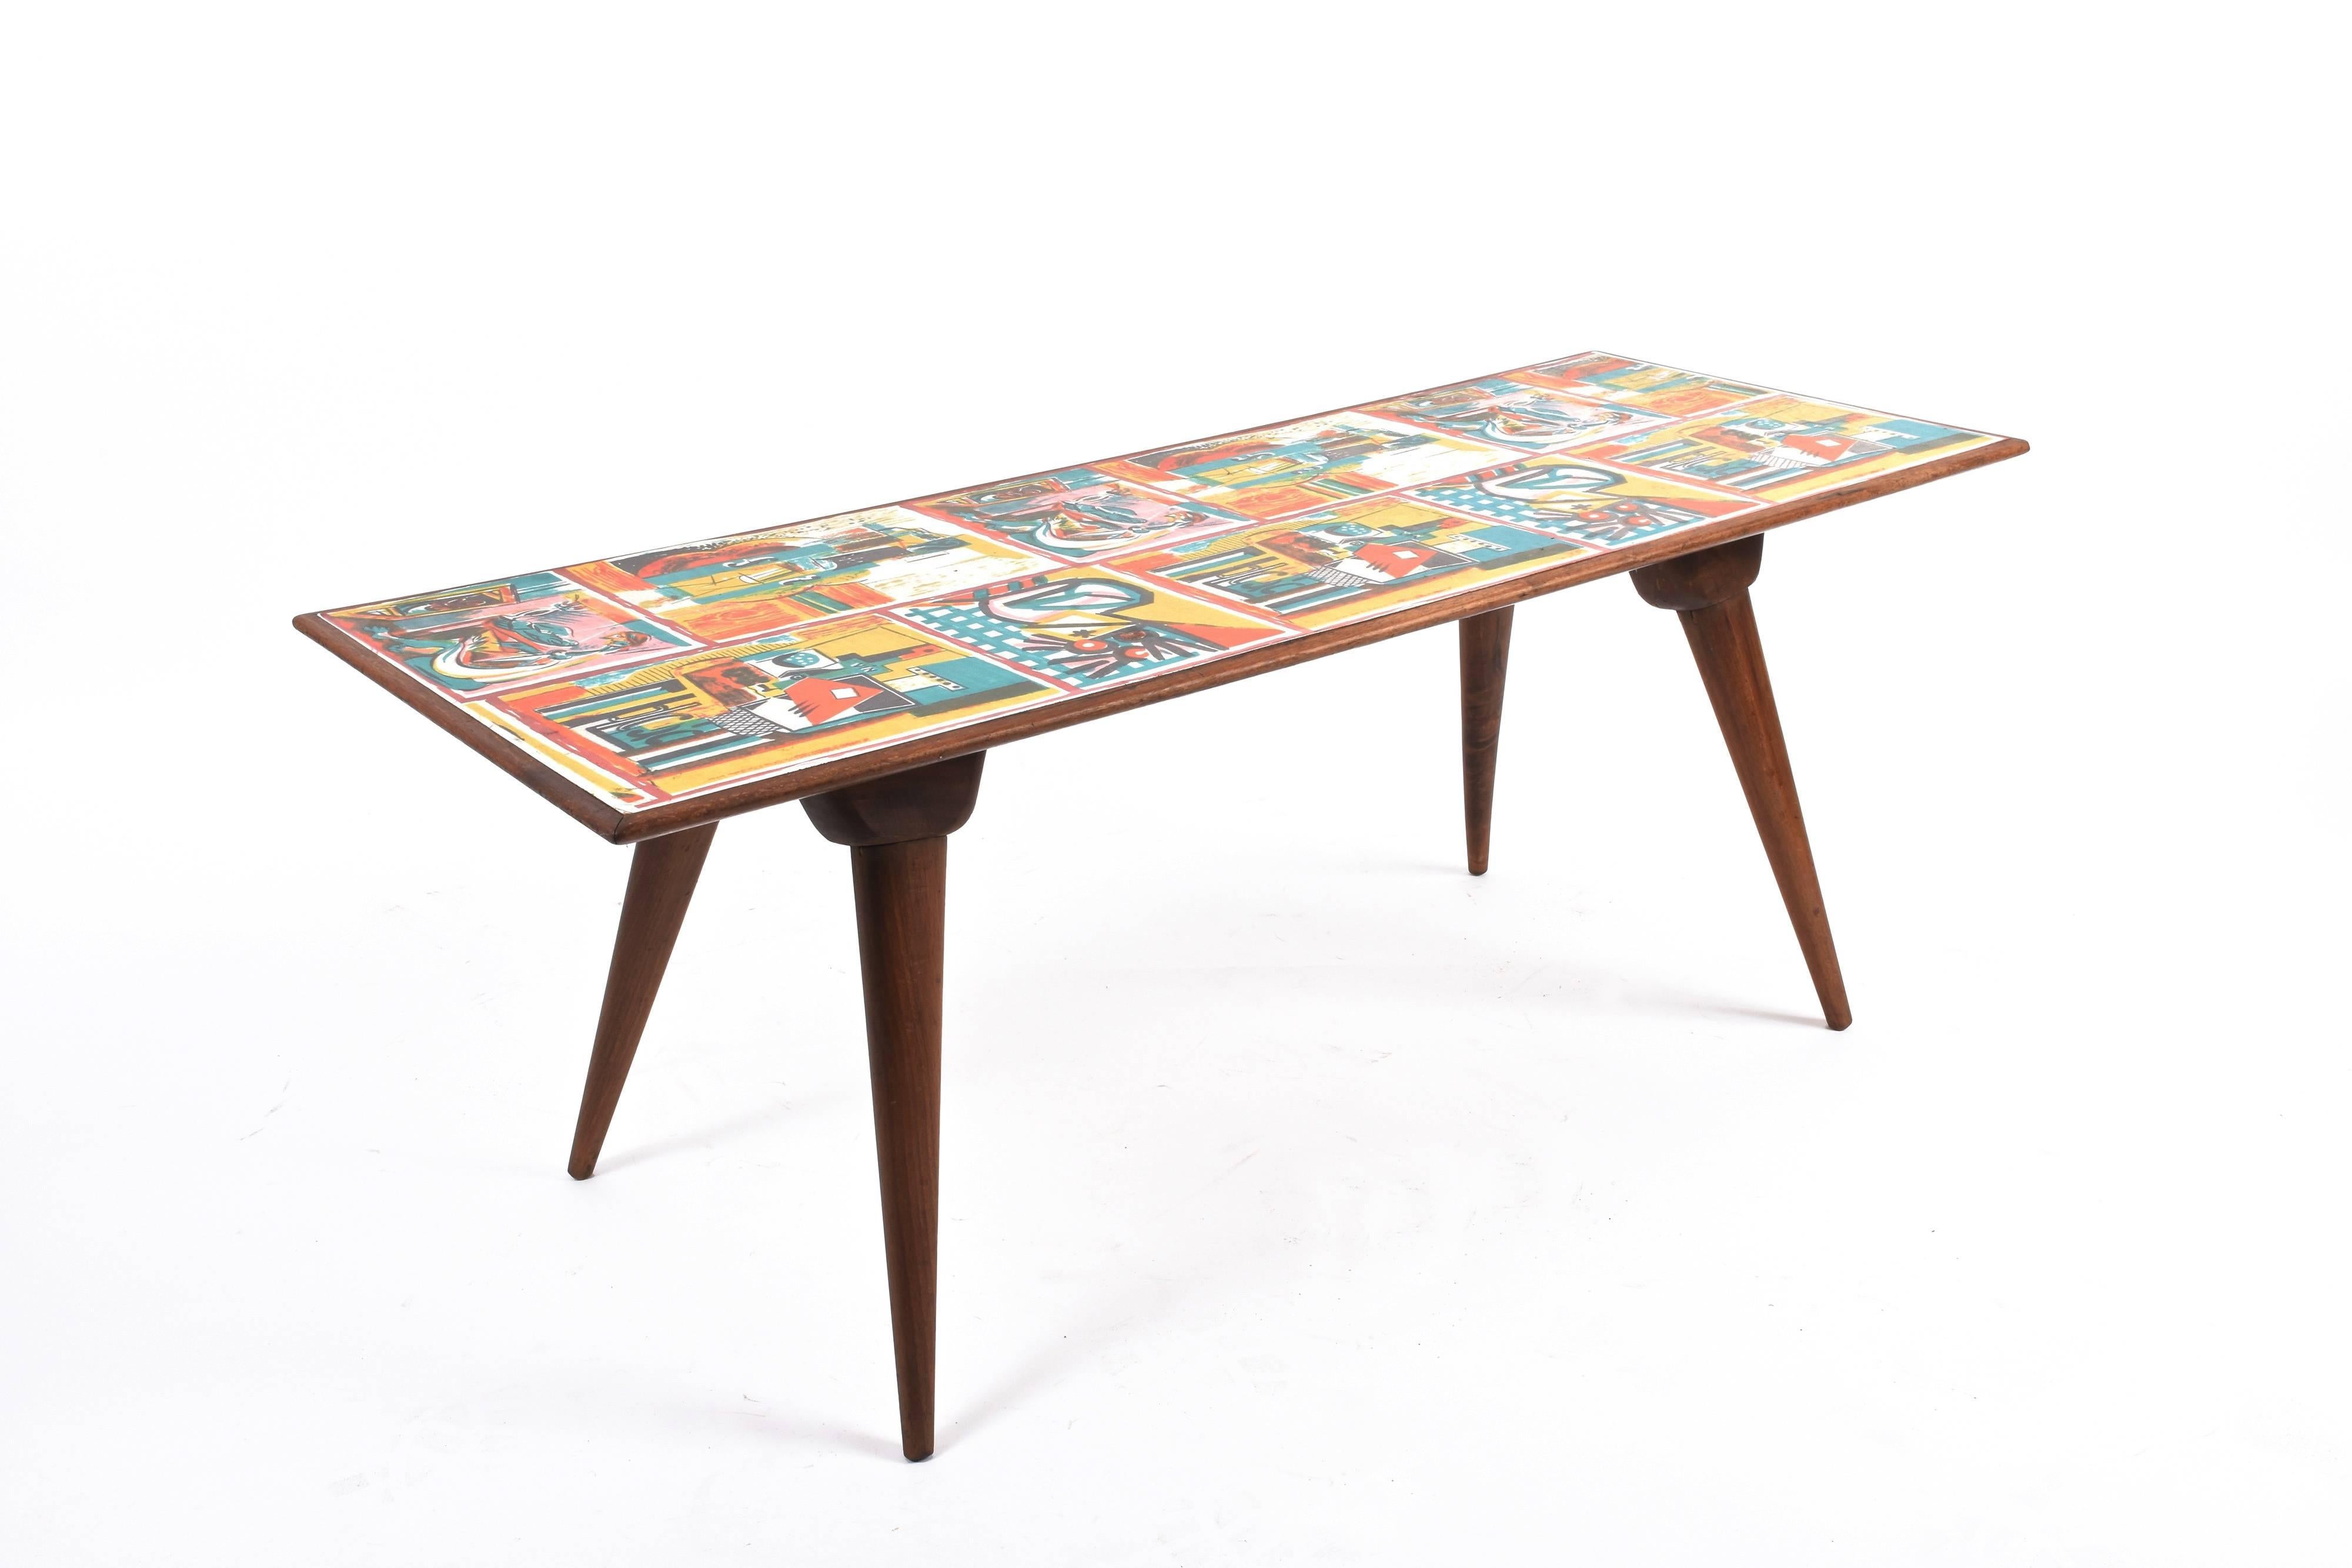 Mid-Century Modern Midcentury Printed Wood and Plastic Italian Coffee Table after De Poli, 1950s For Sale